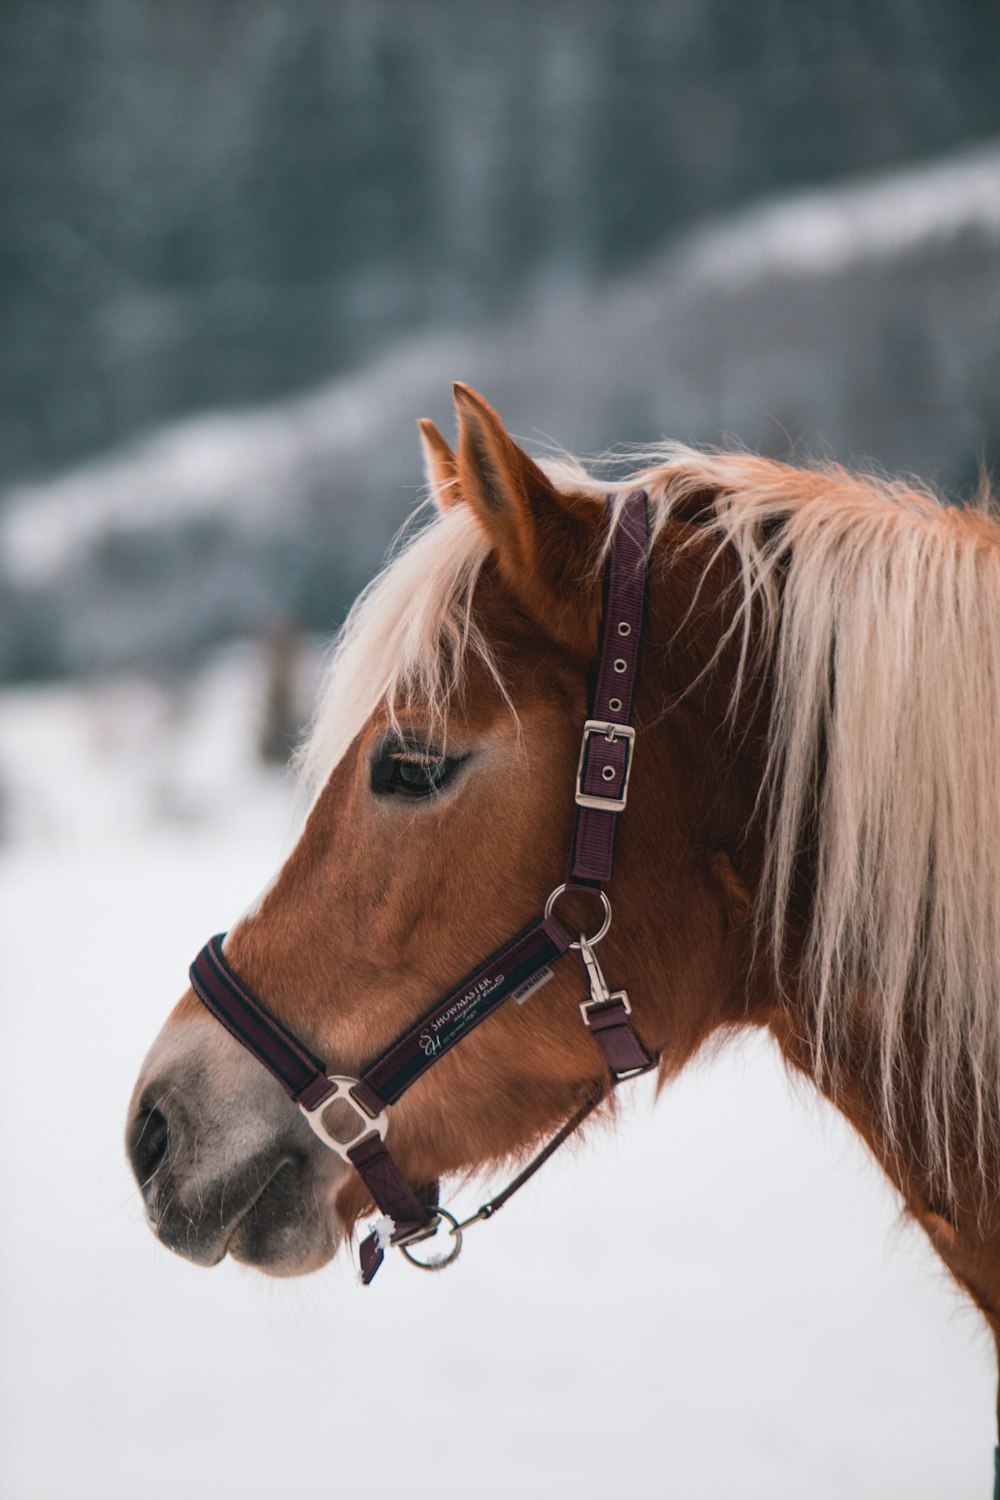 a brown horse with blonde hair standing in the snow